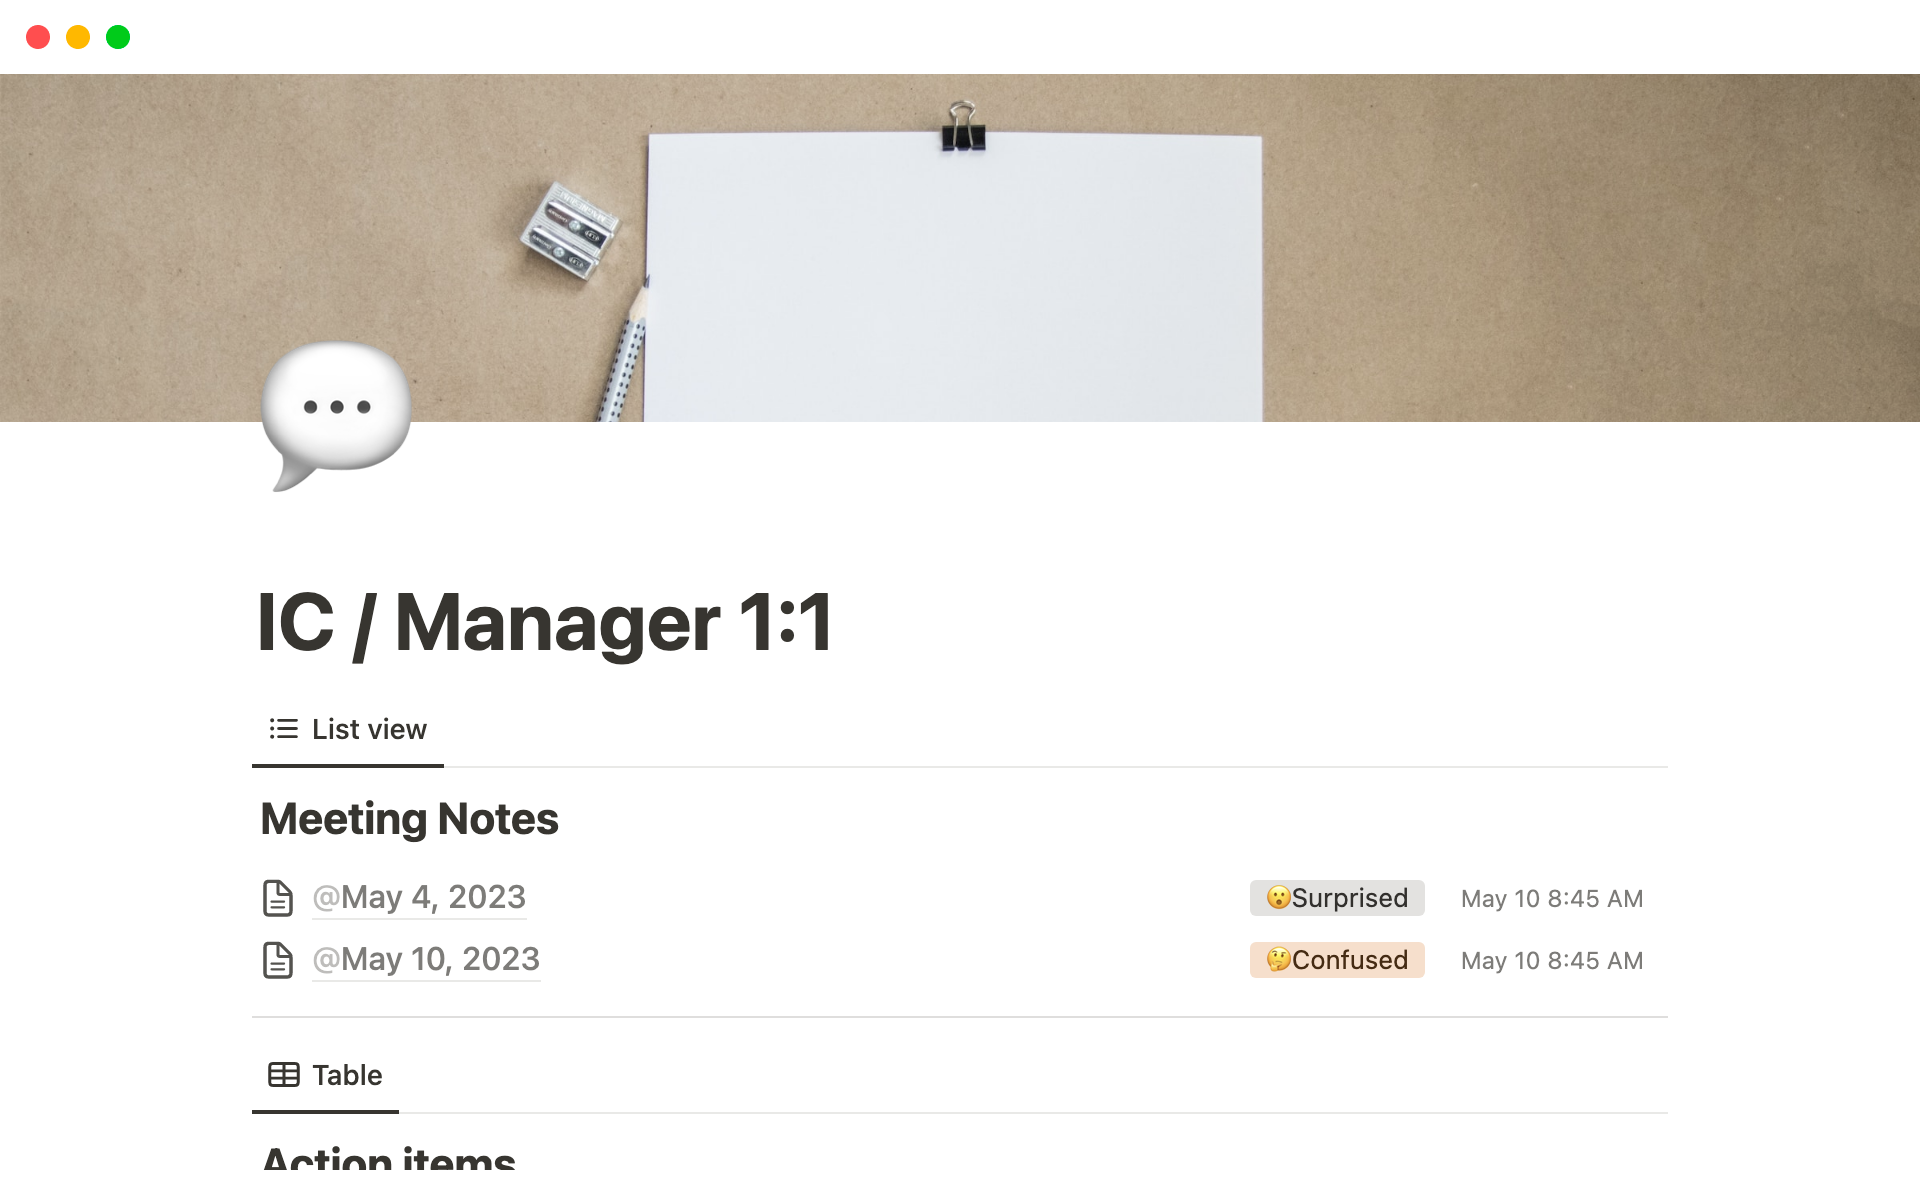 Keep track of 1on1s notes and action items for managers